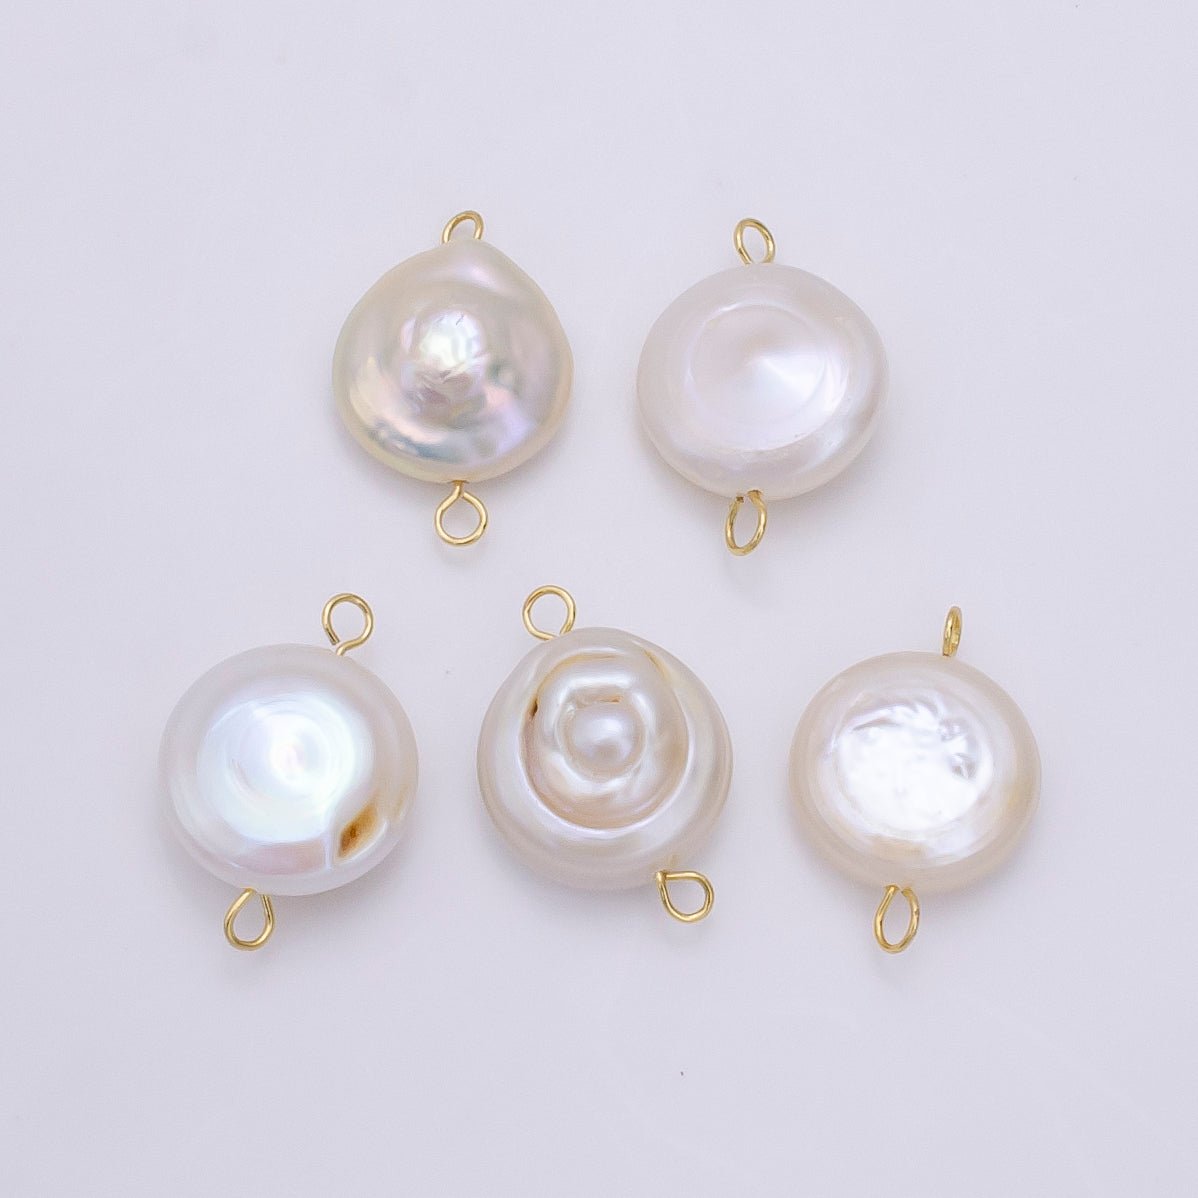 Clearance! 1x Freeform Natural Button Pearl Charm Connector White Fresh Pearl Charm 14K Gold Filled For Bridal Necklace Earring Bracelet Jewelry Making P-1792 - DLUXCA